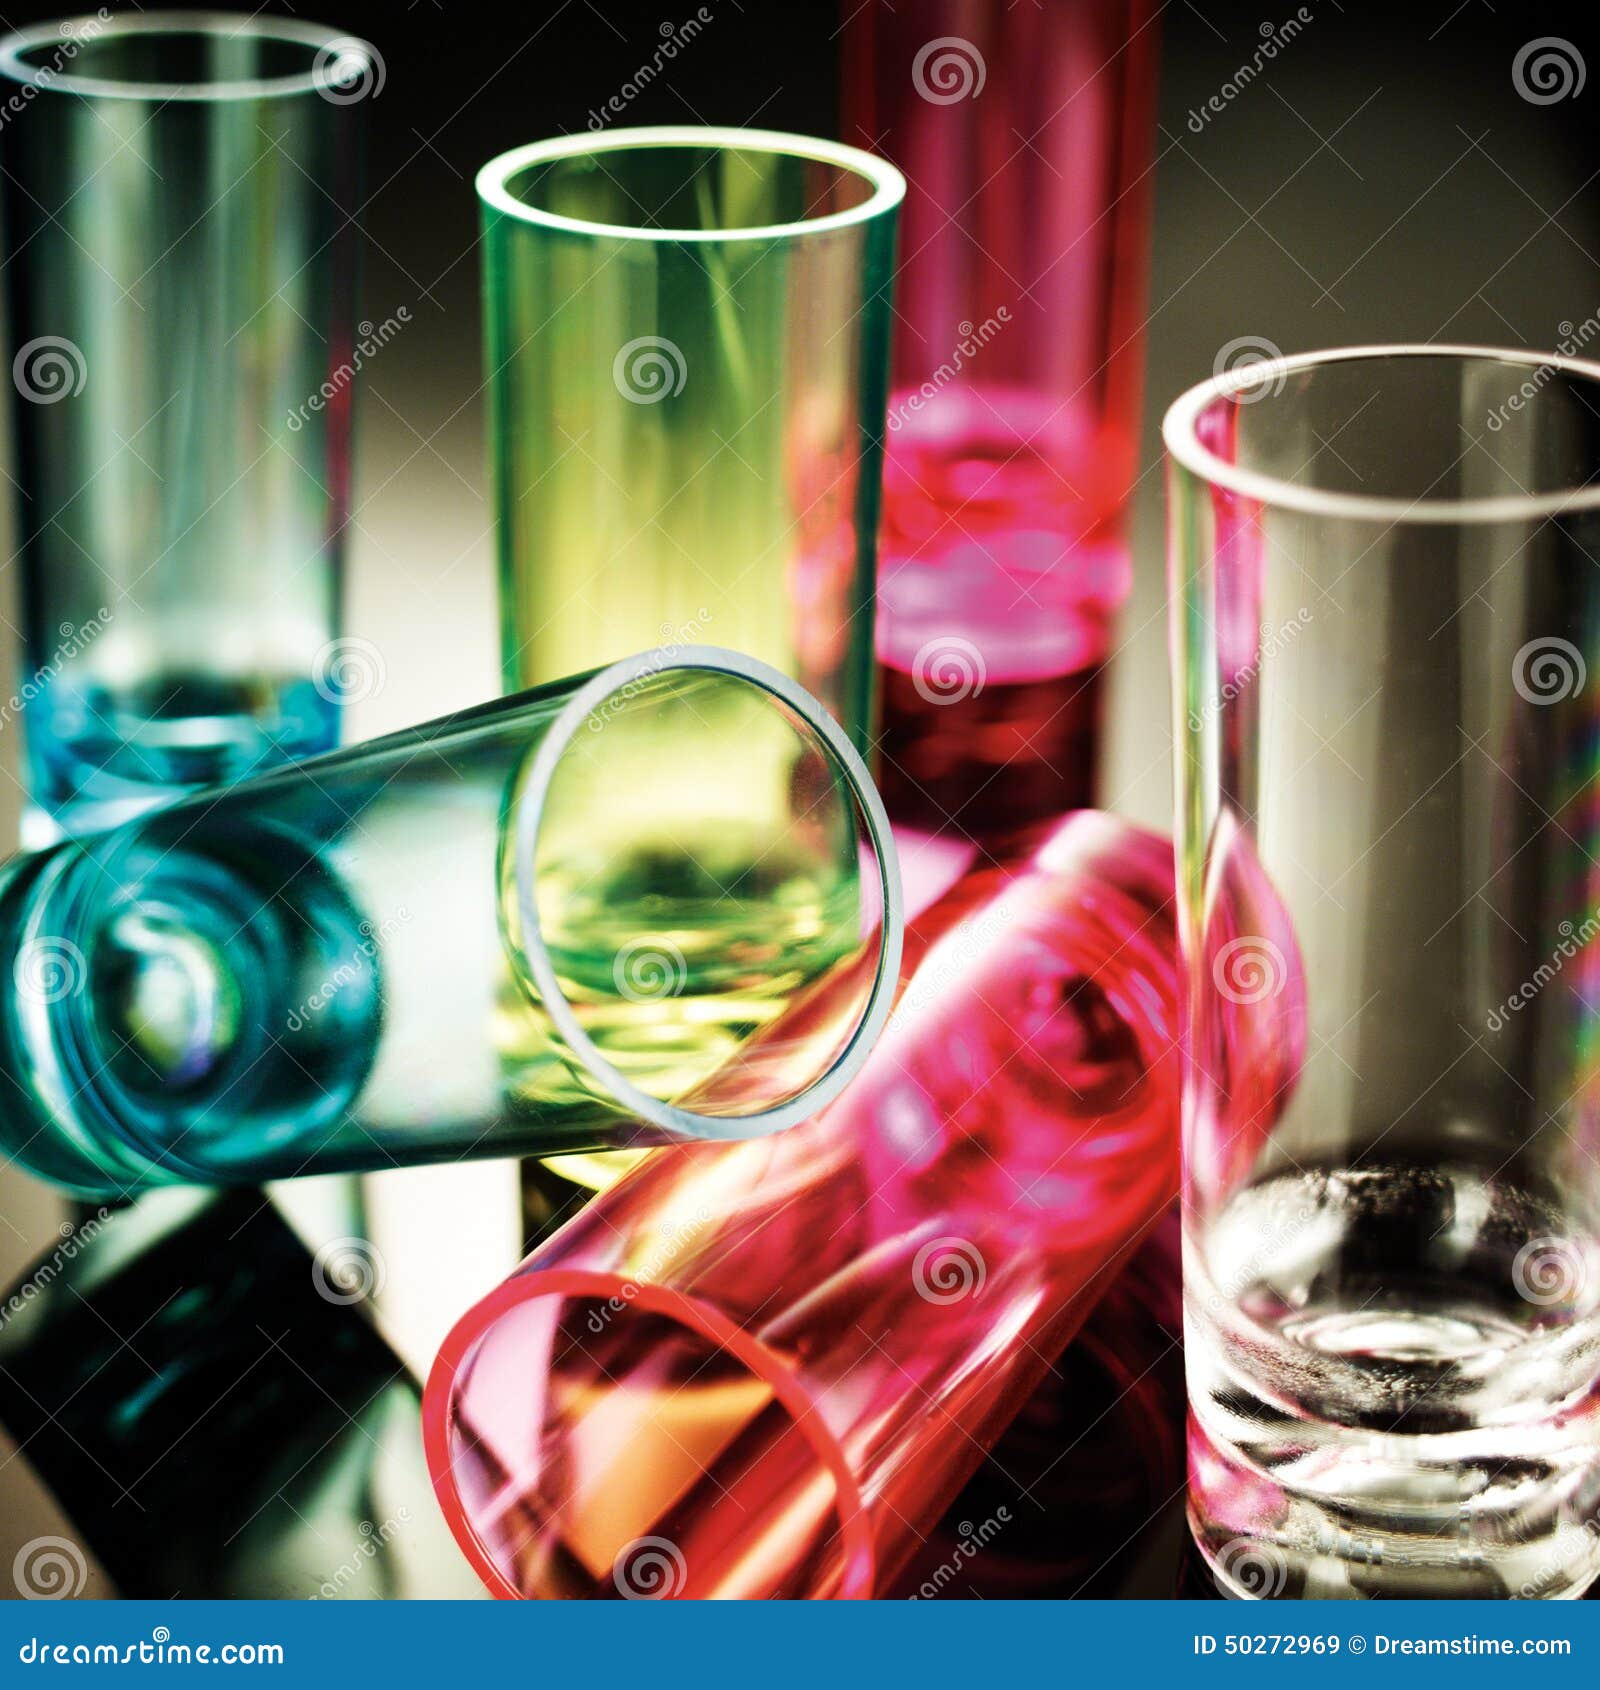 Colored Shot glasses. Blue,green,pink and clear shot glasses on a mirrored background